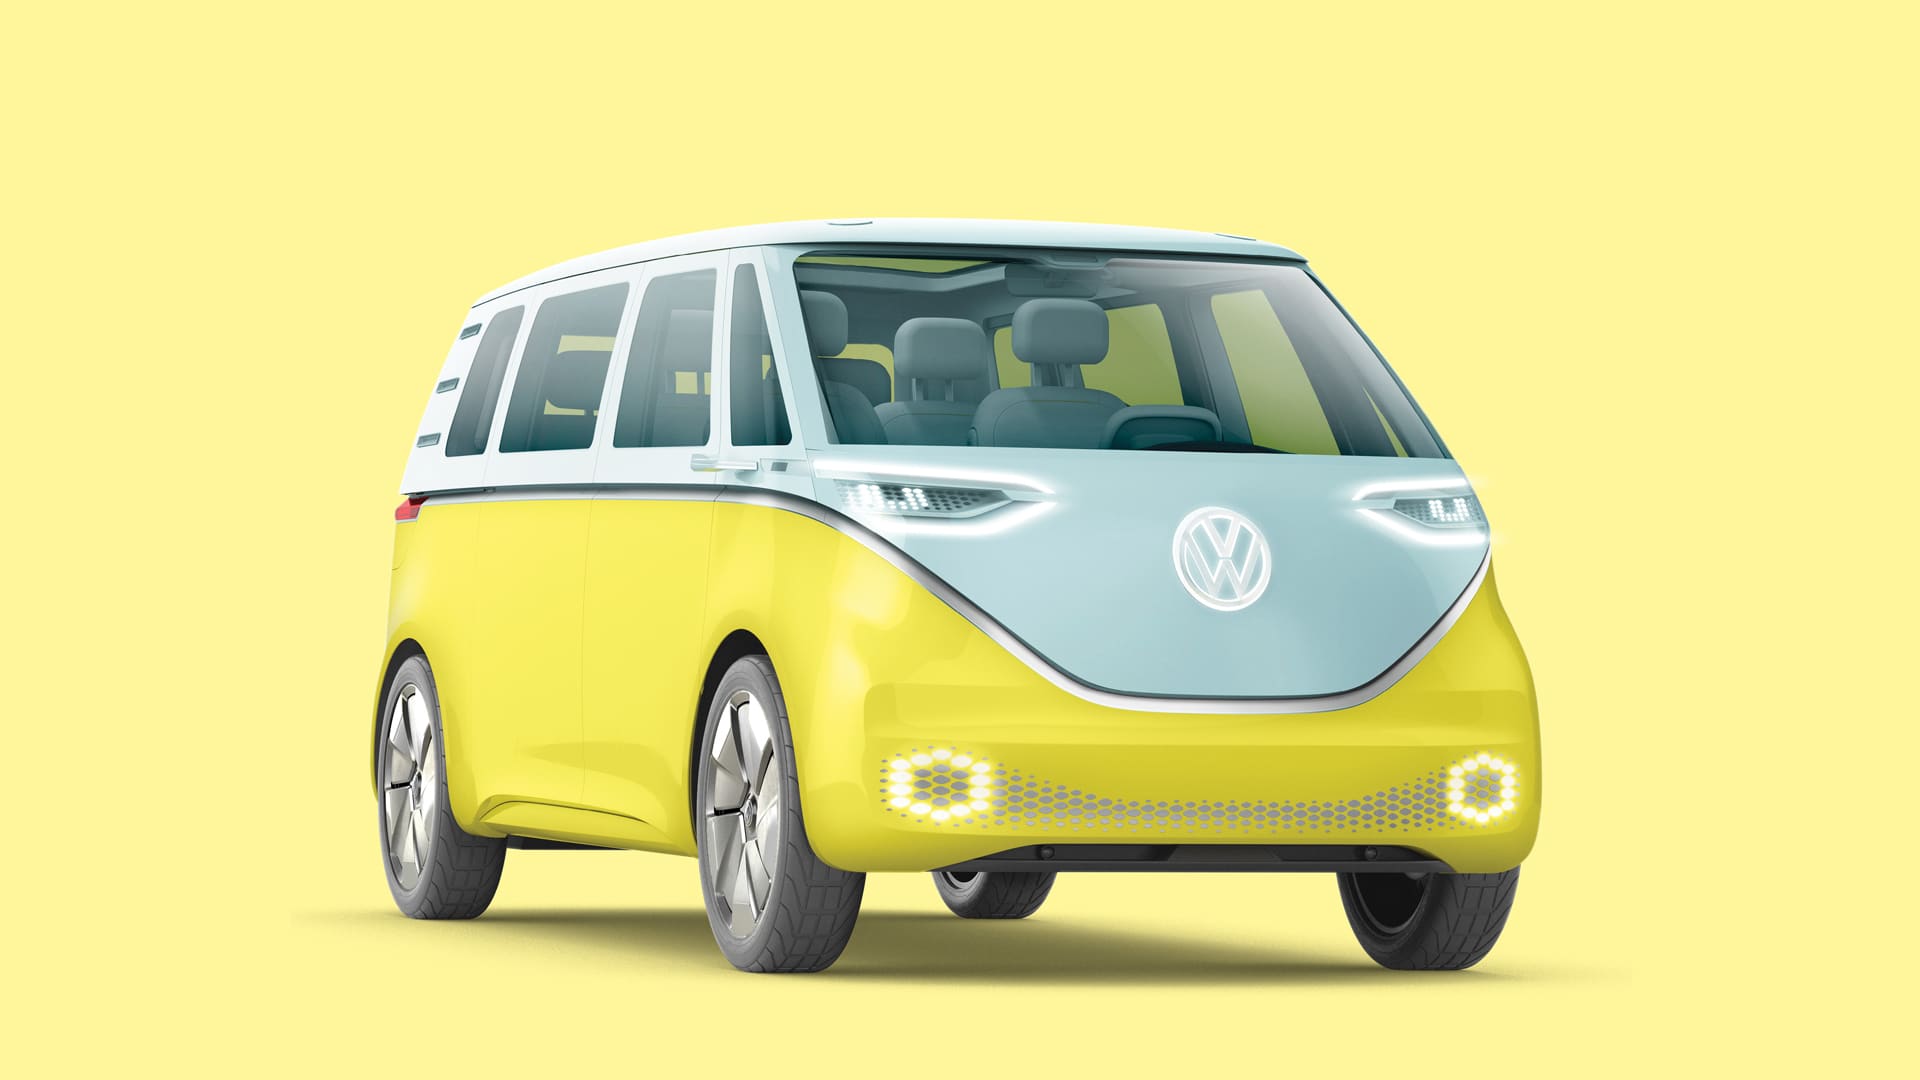 Why VW decided to reference its scandal in its new electric-car ad campaign